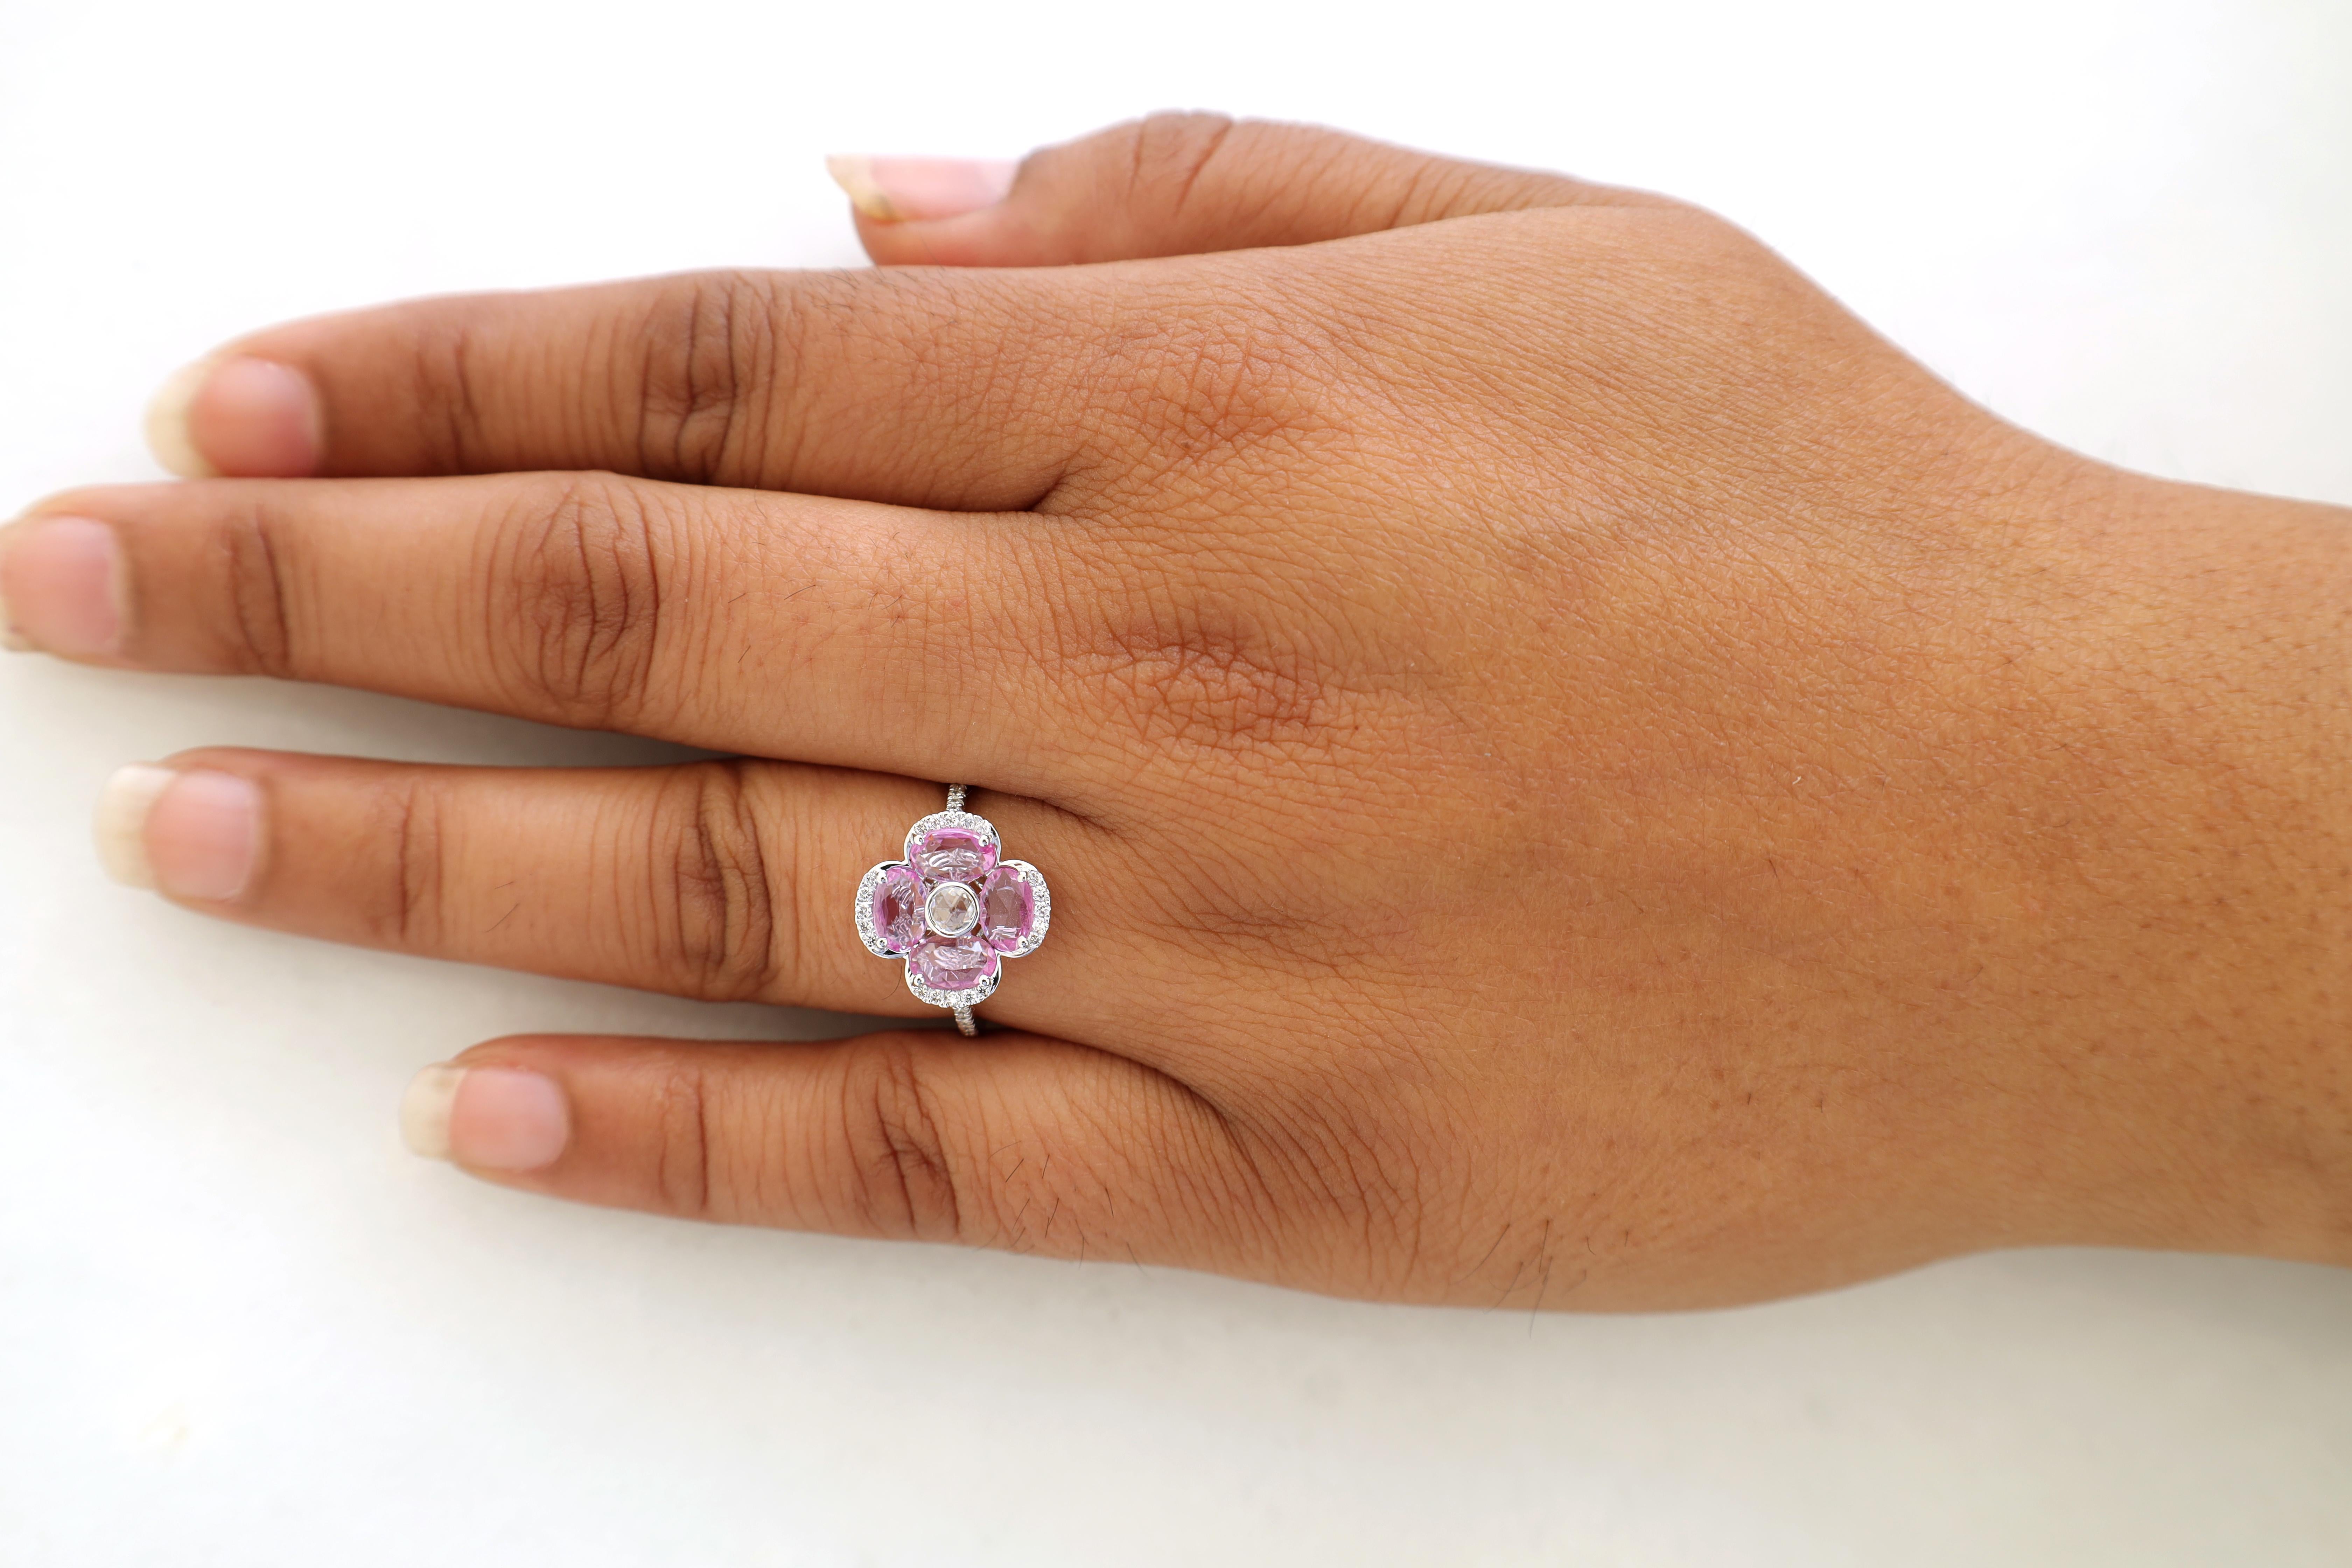 Oval Cut Rose Cut Diamond Surrounded by Oval Pink Sapphire Flower Ring